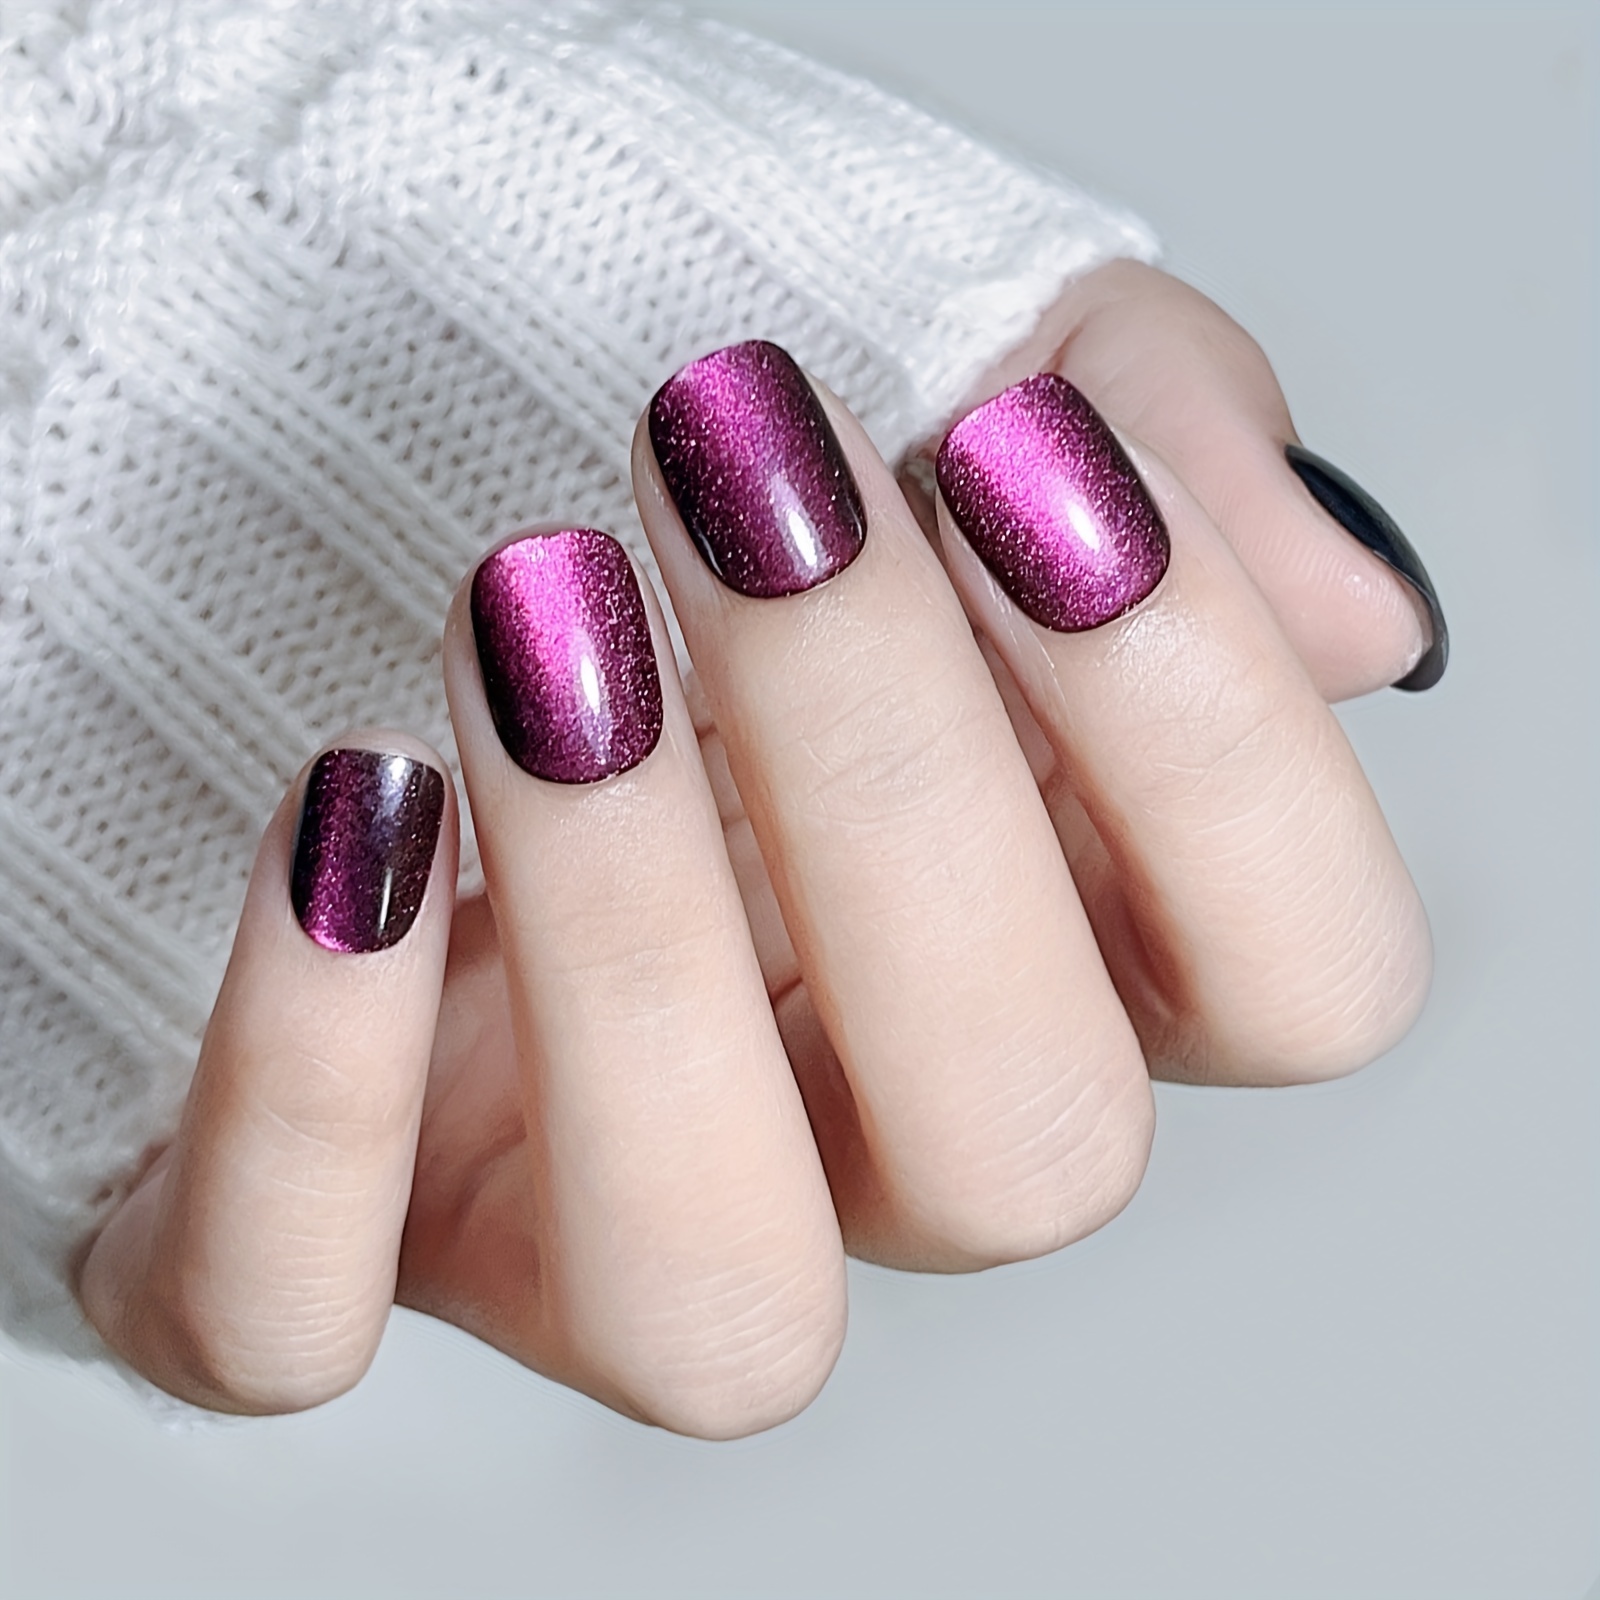 

24pcs Purple Cat Eye Fake Nails, Reflective Glitter Press On Nails With Chameleon Effect, Glossy Glue On Nails Full Cover Short Square False Nails For Women Girls